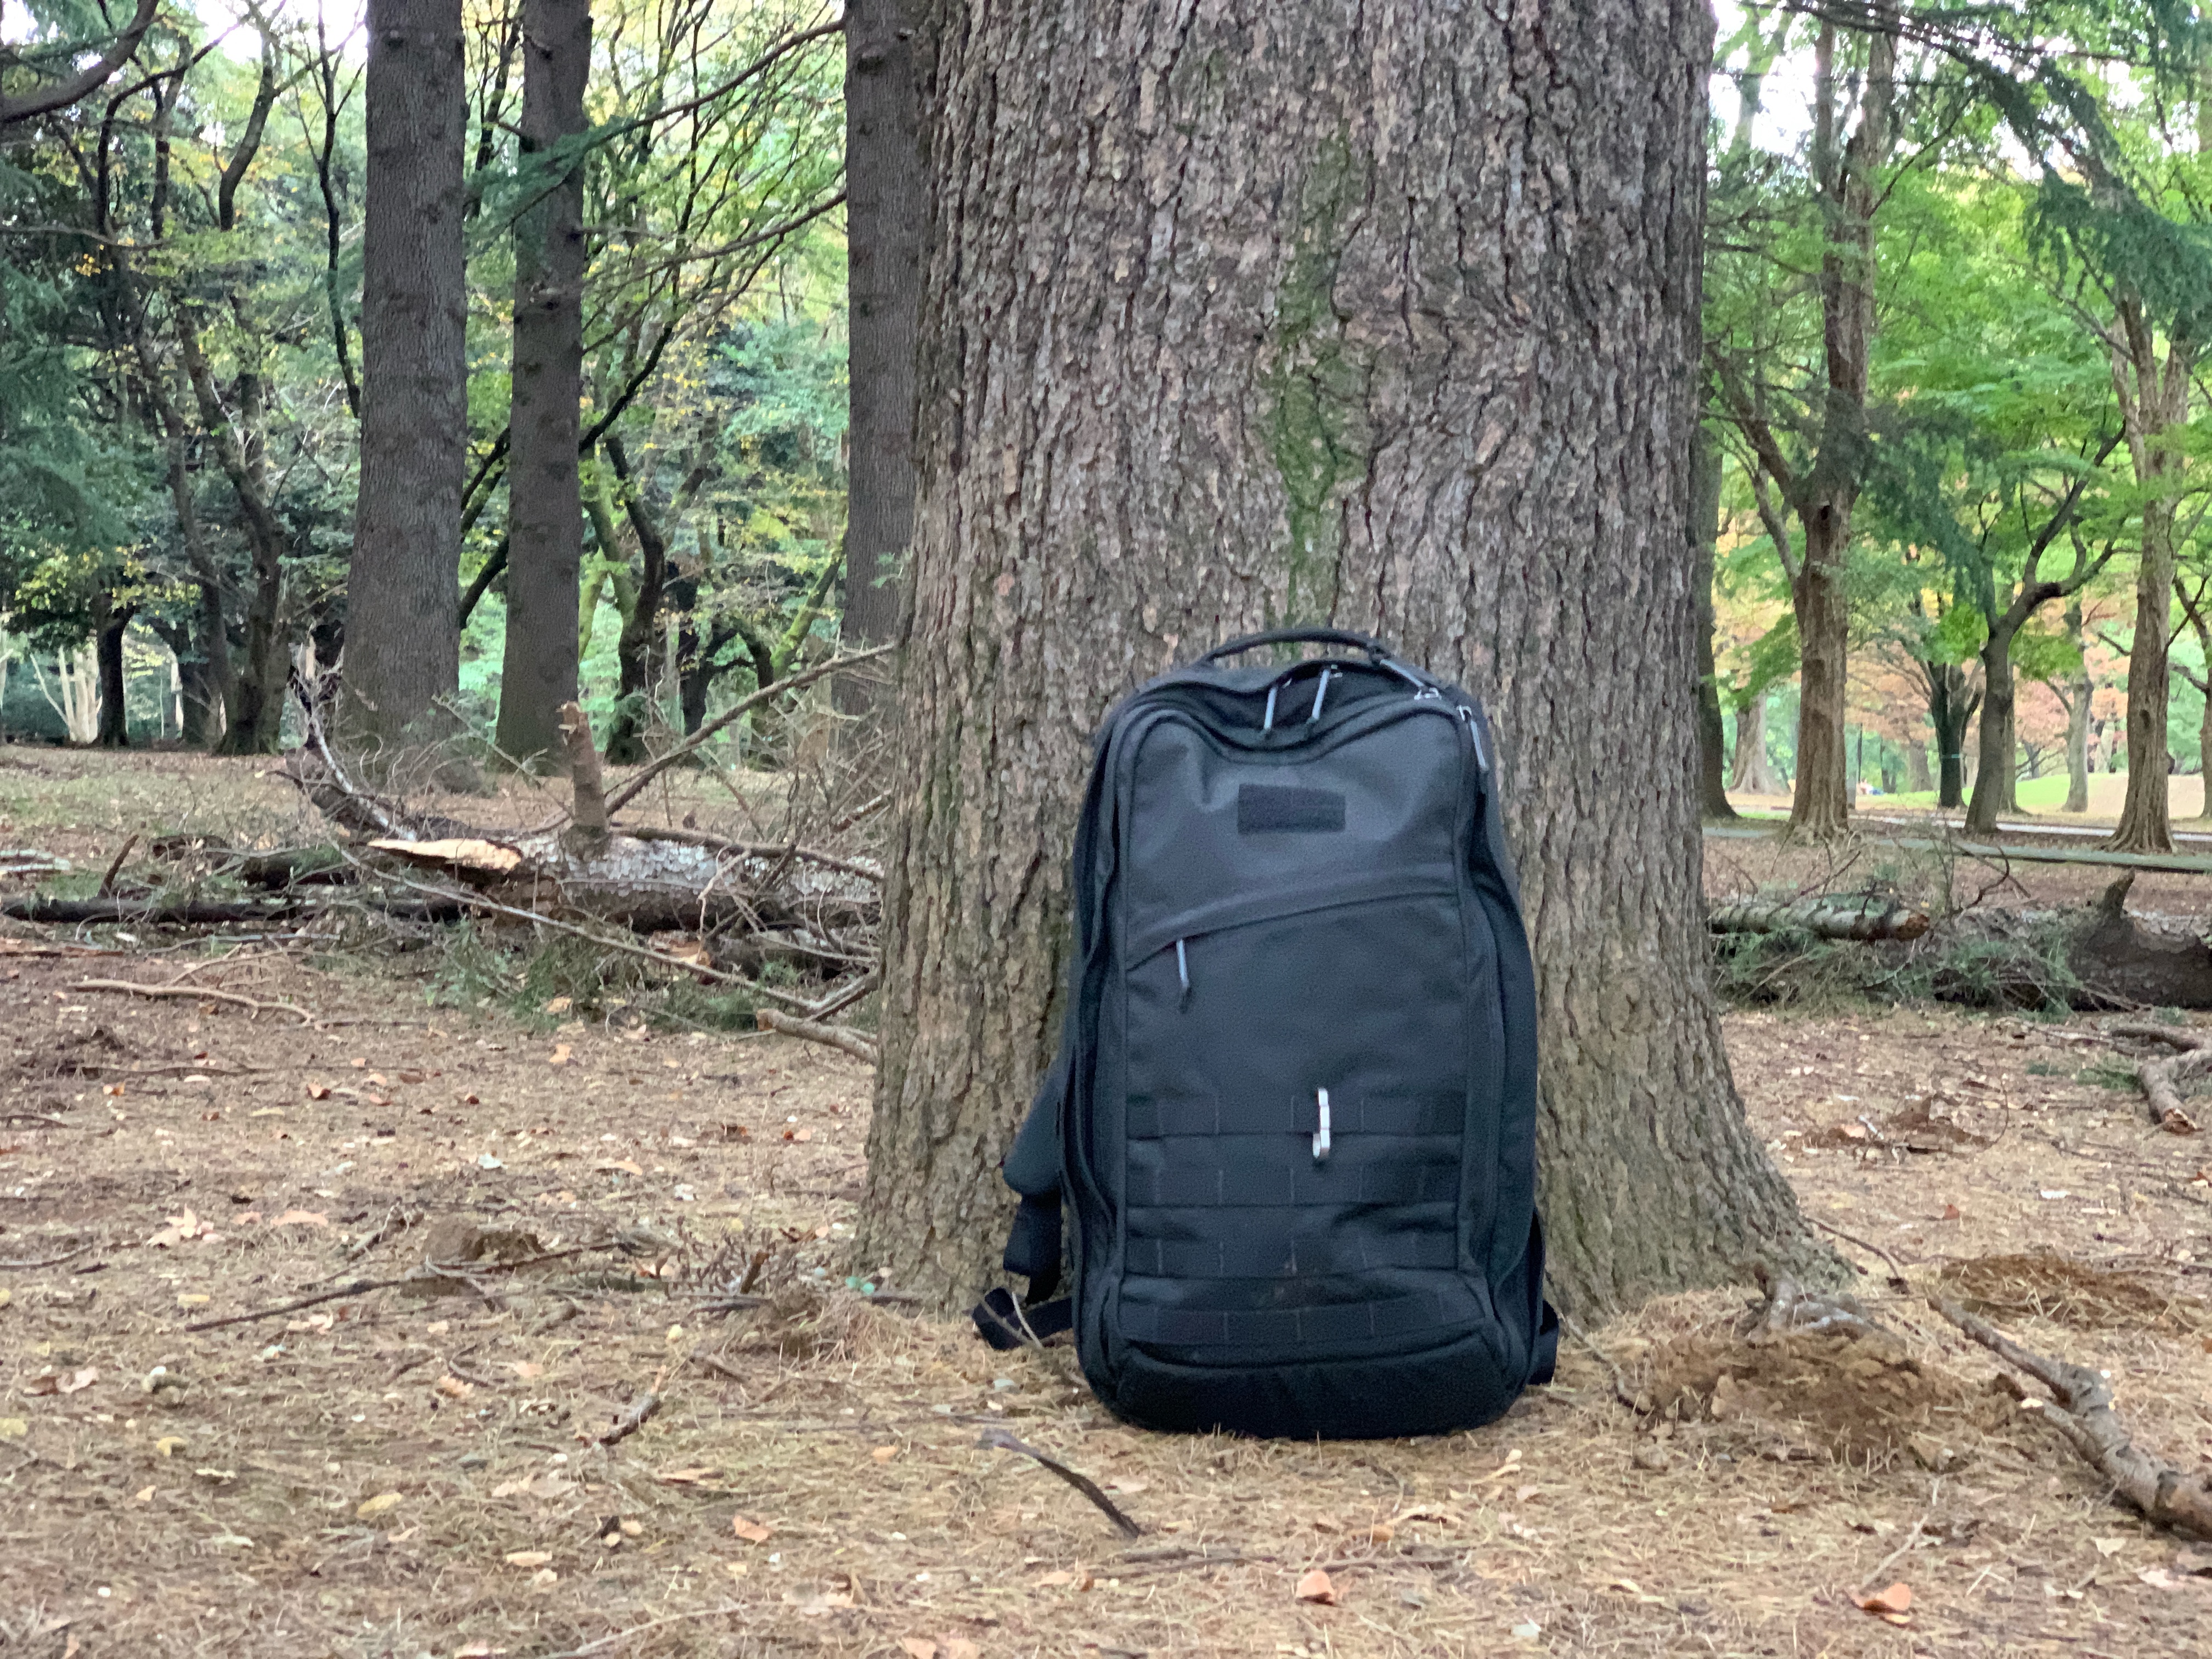 The GORUCK Black Friday 2019 sale is on the horizon.